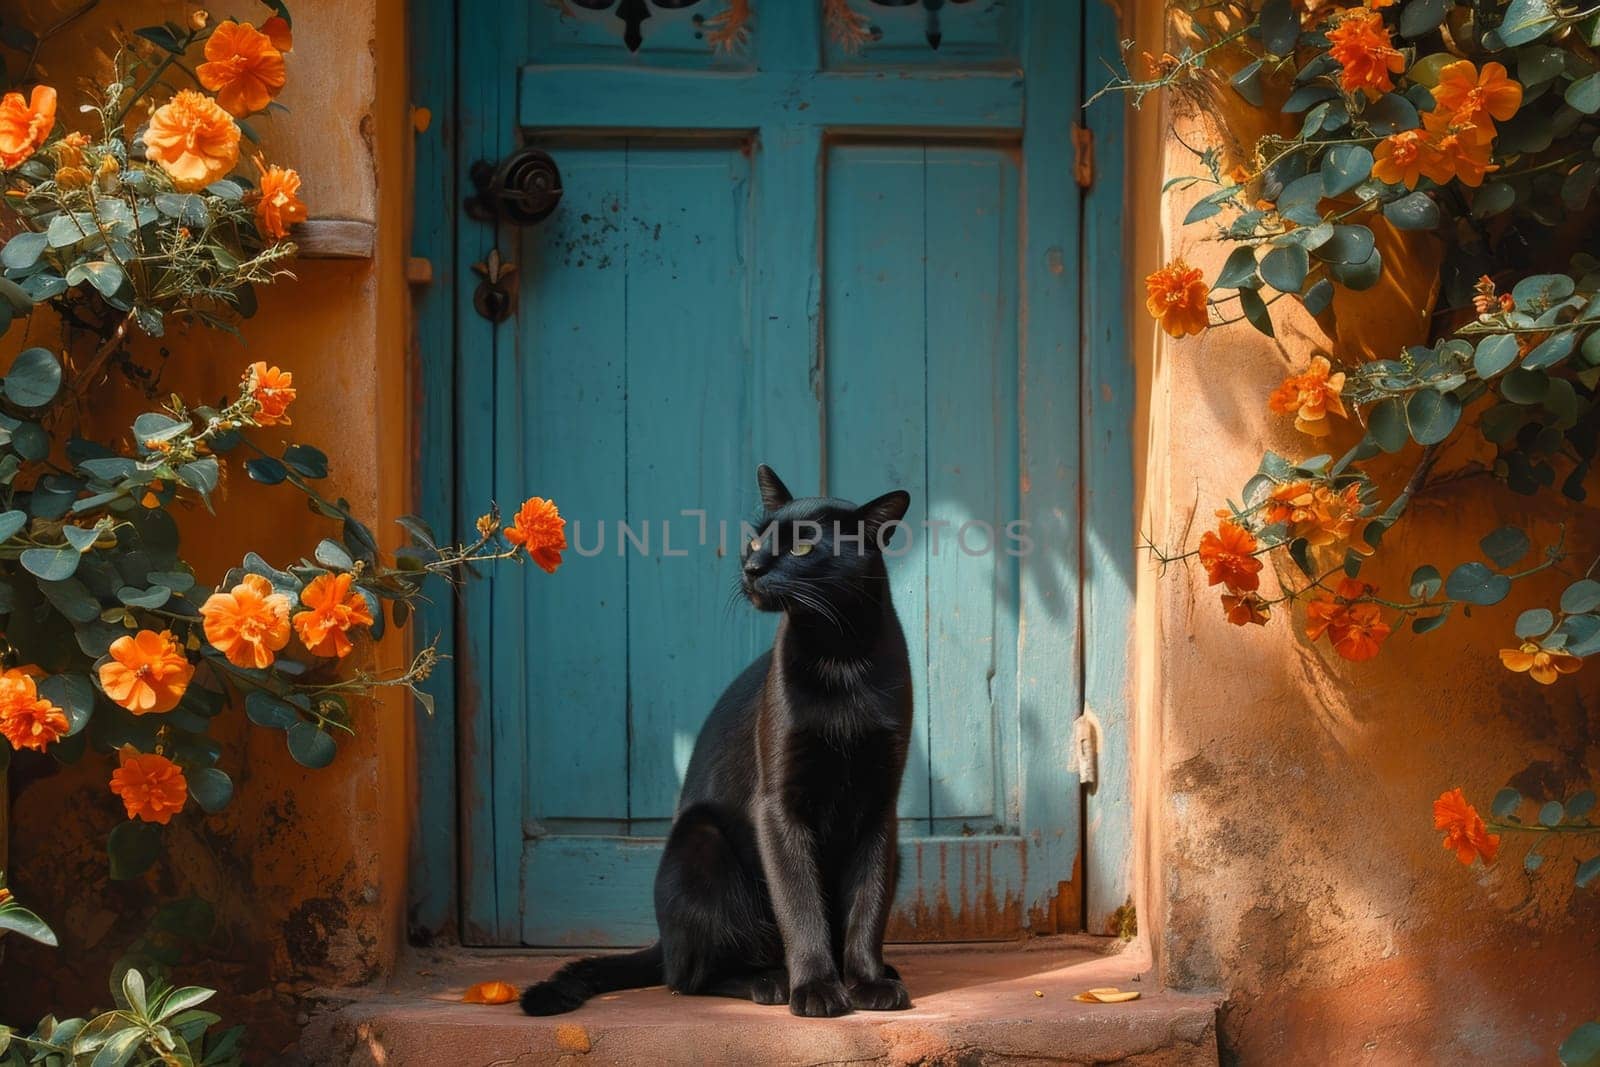 There was a cute black cat sitting near the door, guarding the entrance.